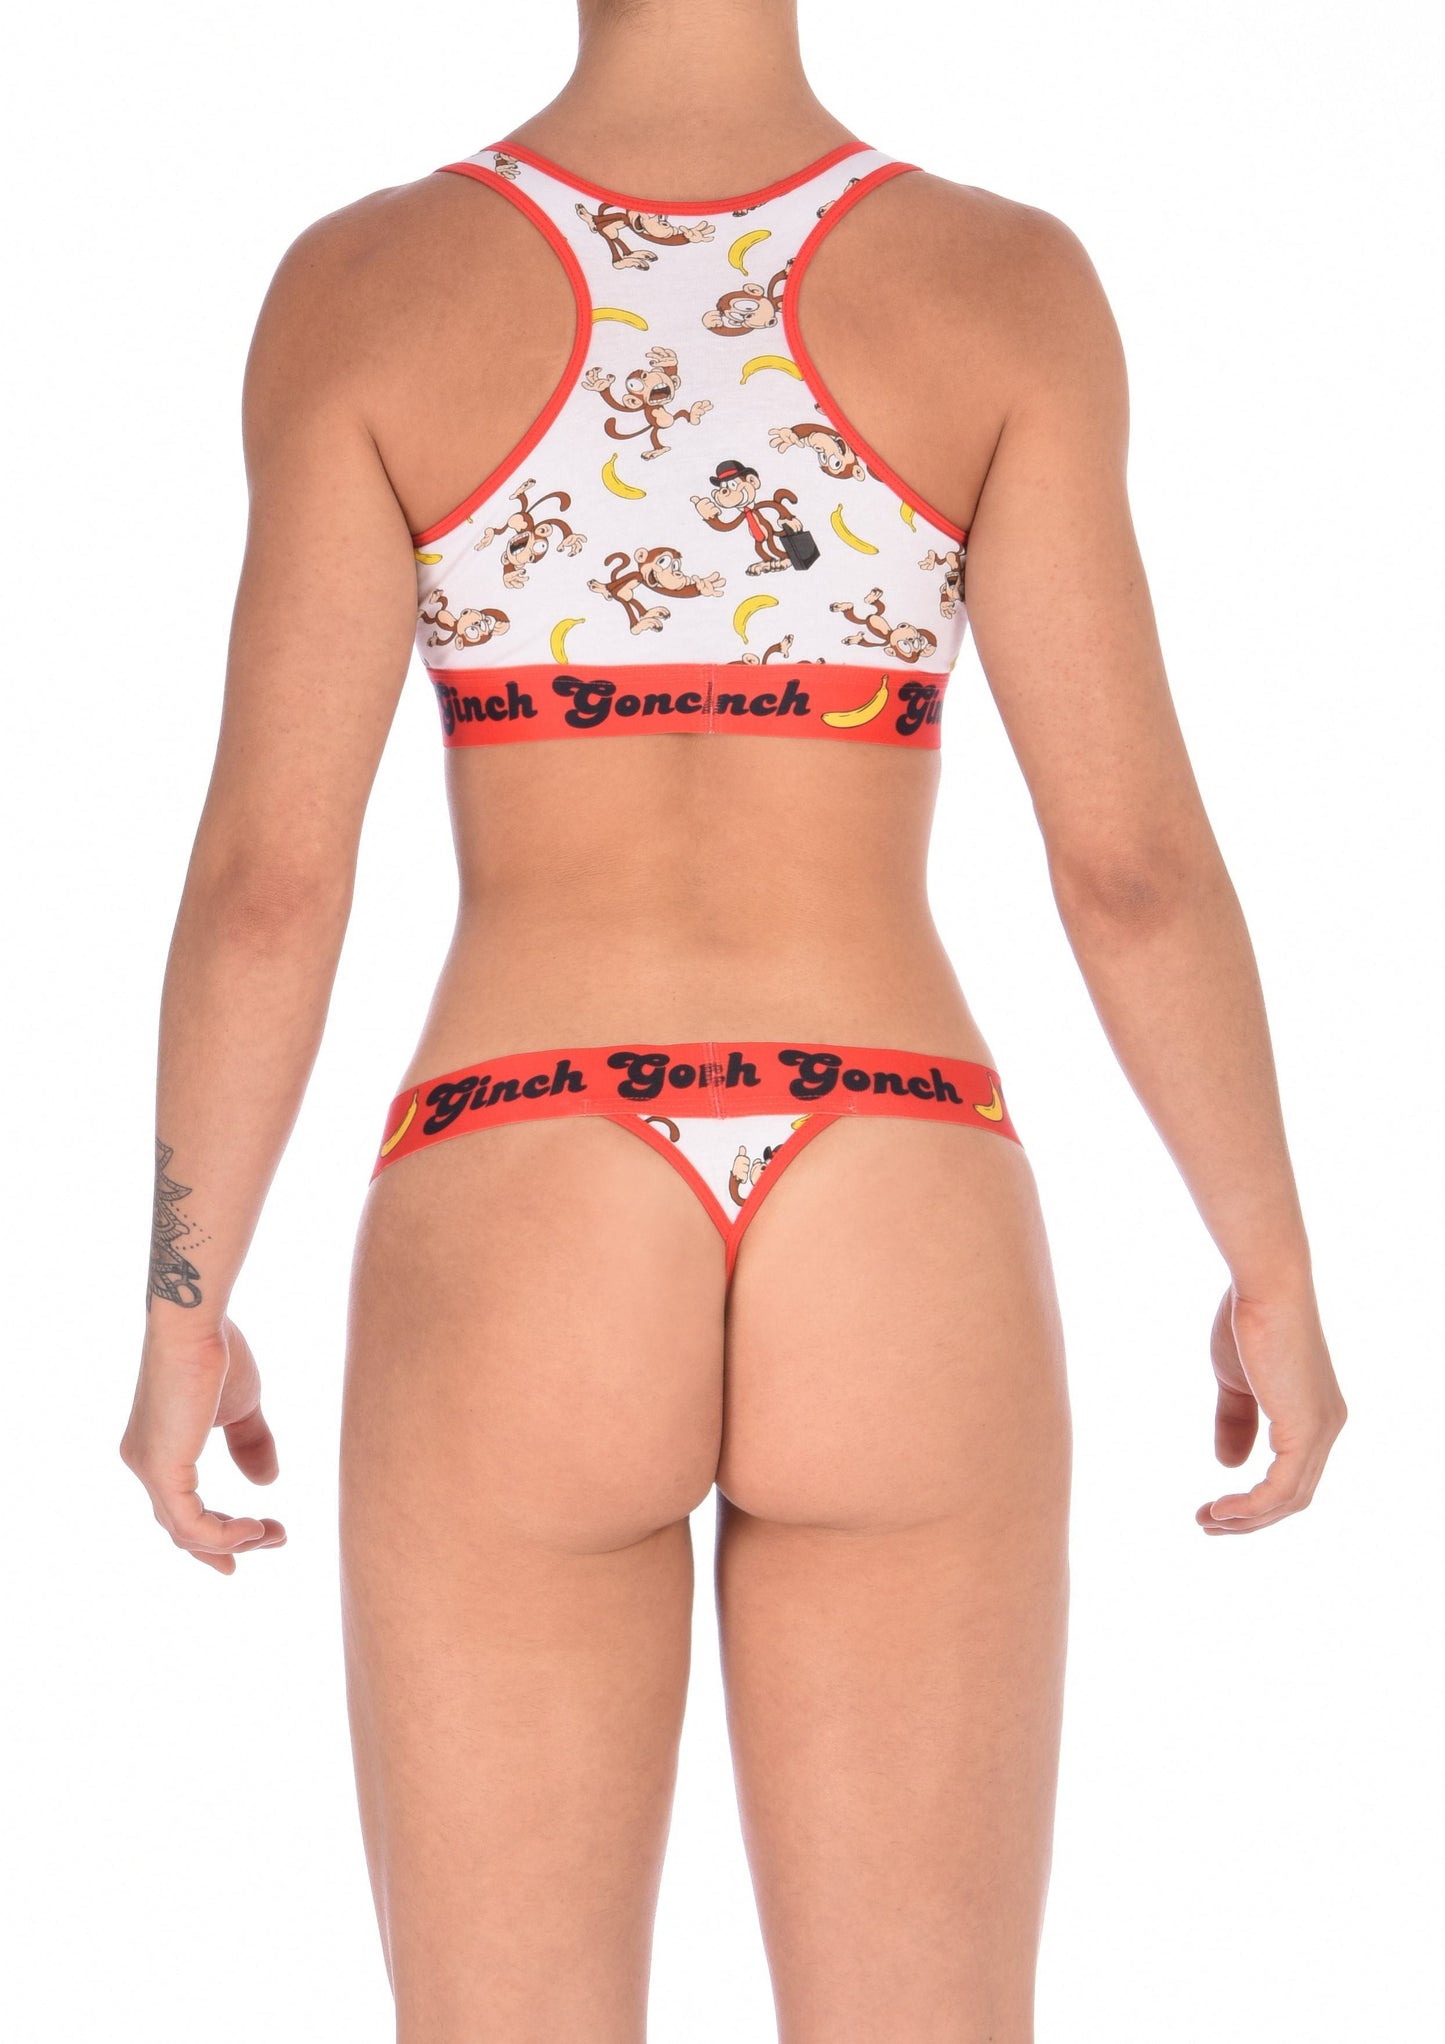 GG Ginch Gonch Gone Bananas thong women's underwear white fabric with monkeys and bananas red trim and red printed waistband back shown with matching sports bra